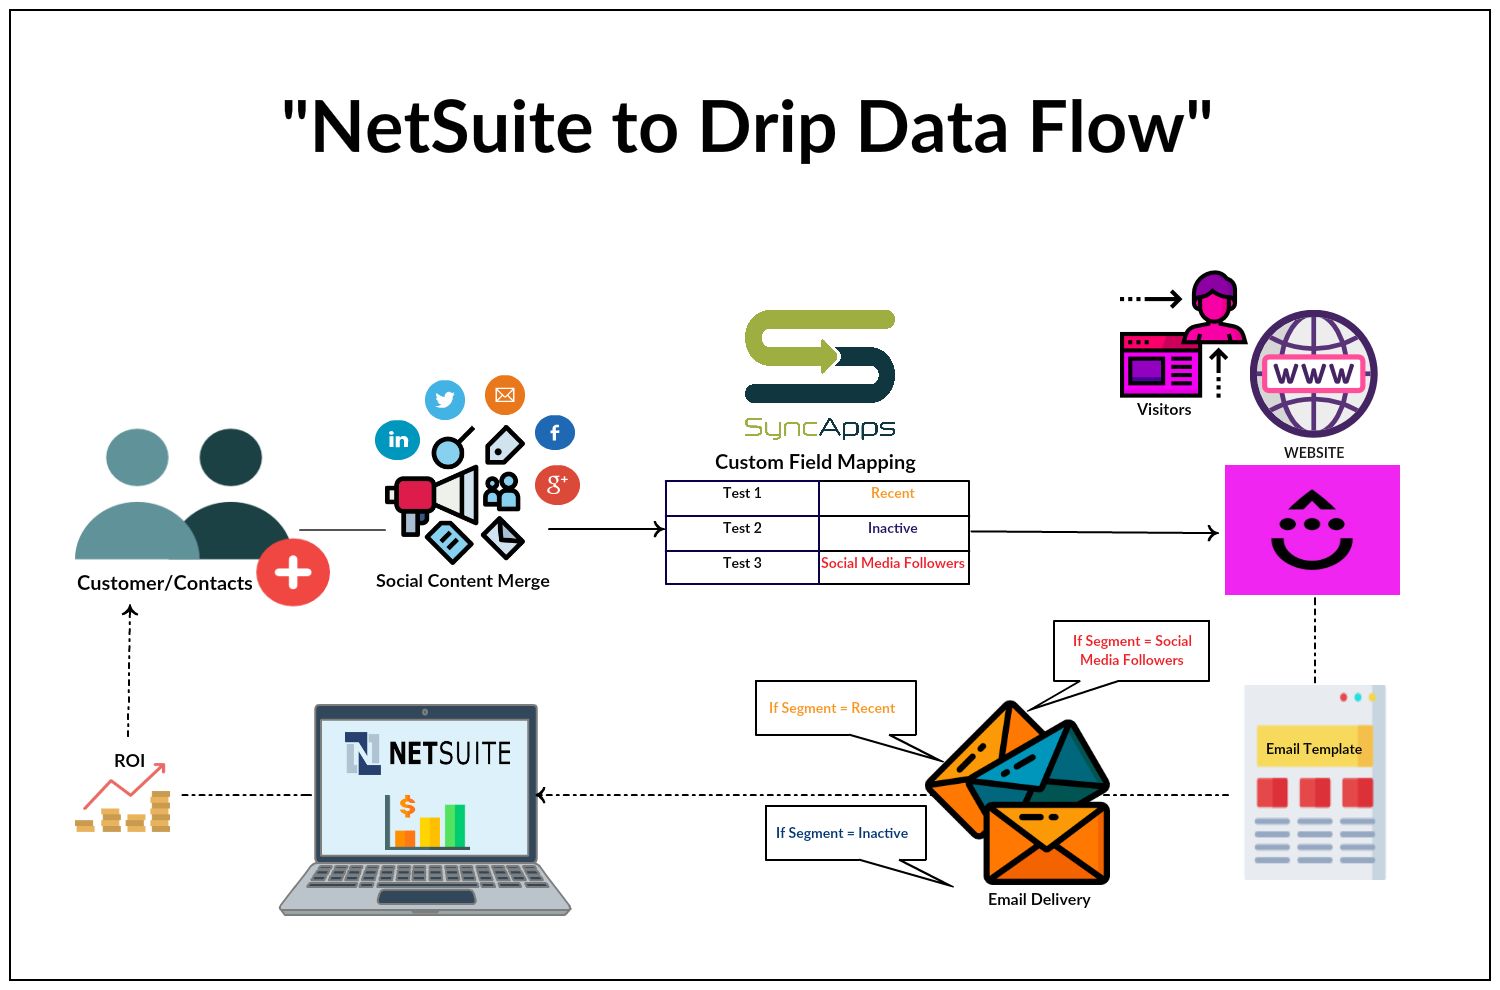 Netsuite to Drip Data flow